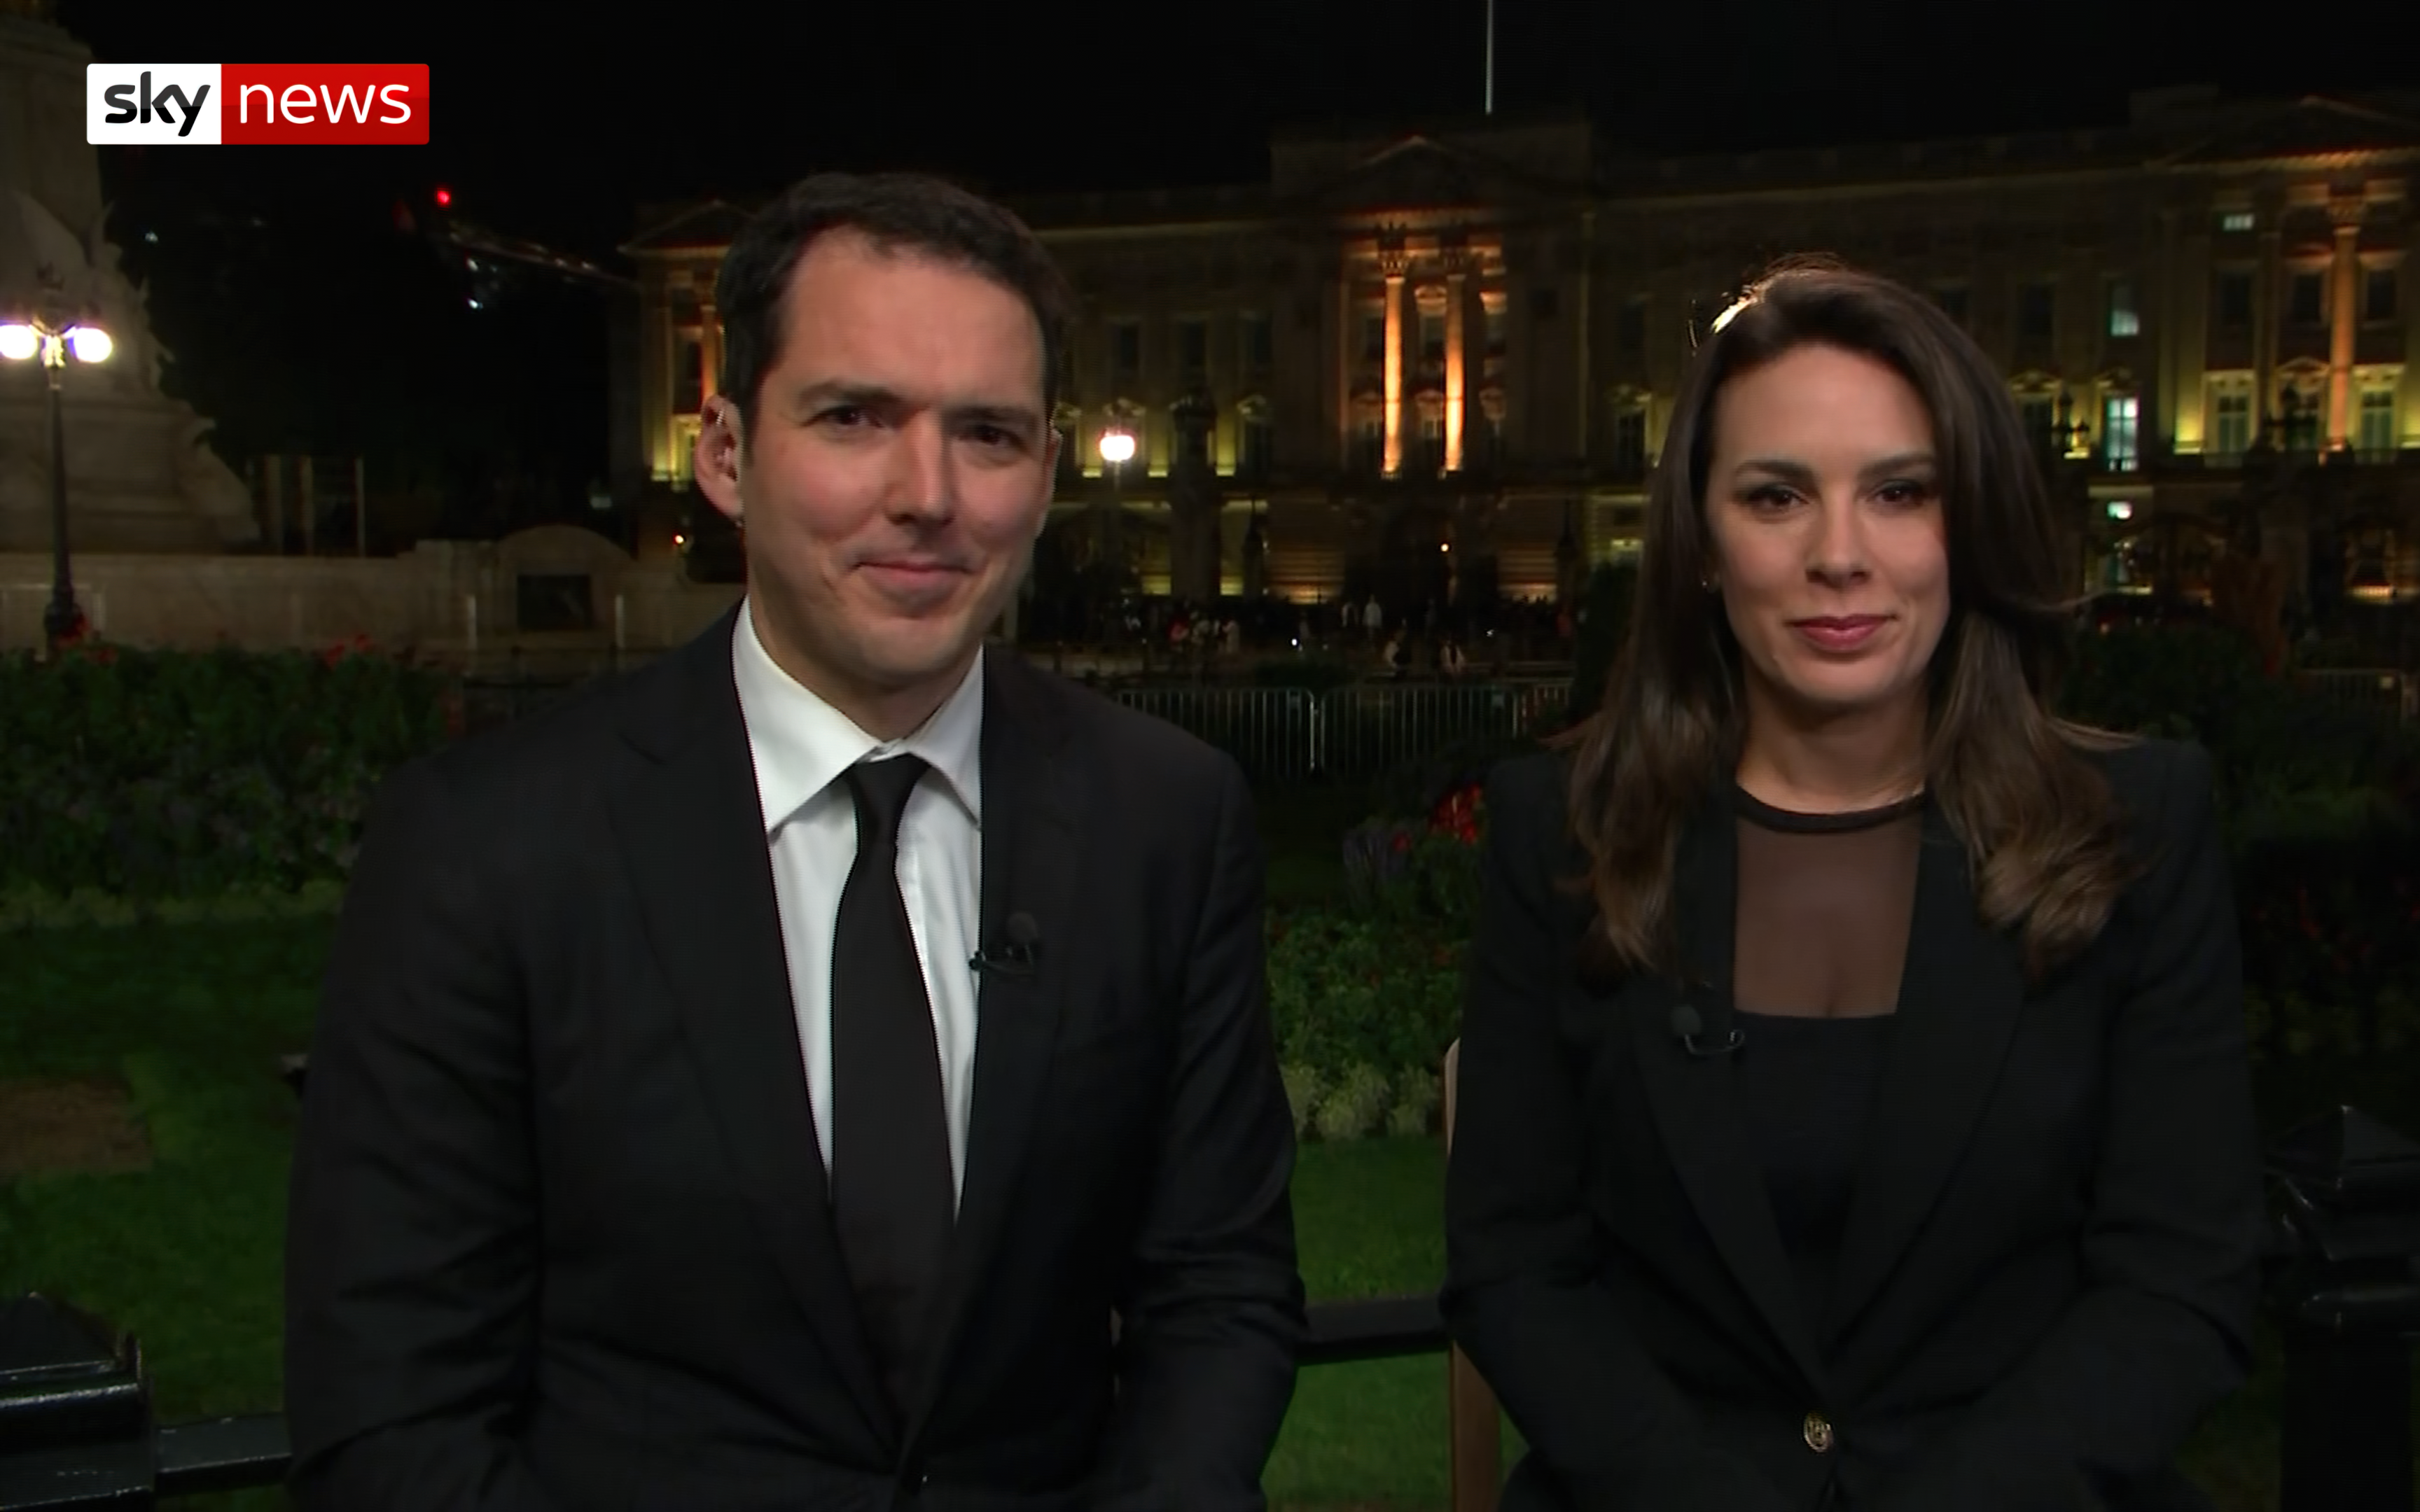 Peter Stefanovic and Laura Jayes